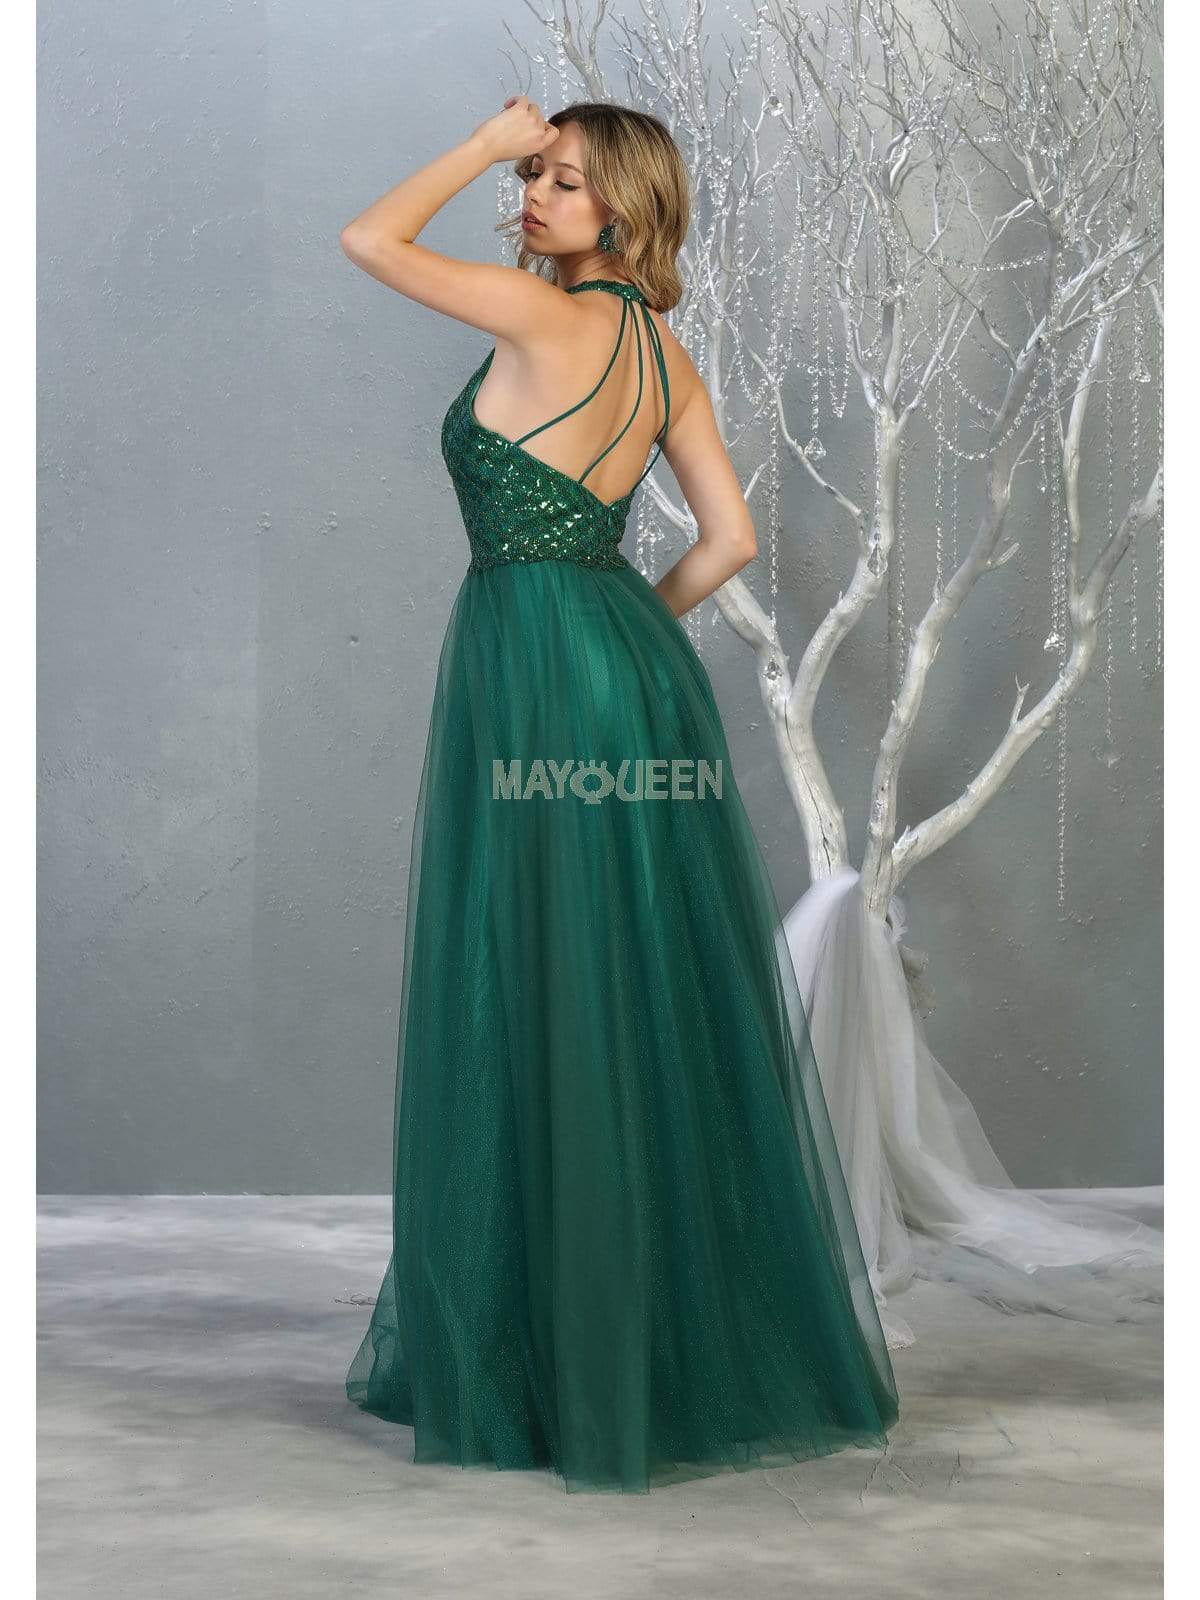 May Queen - RQ7863 Strappy High Halter A-Line Gown Prom Dresses